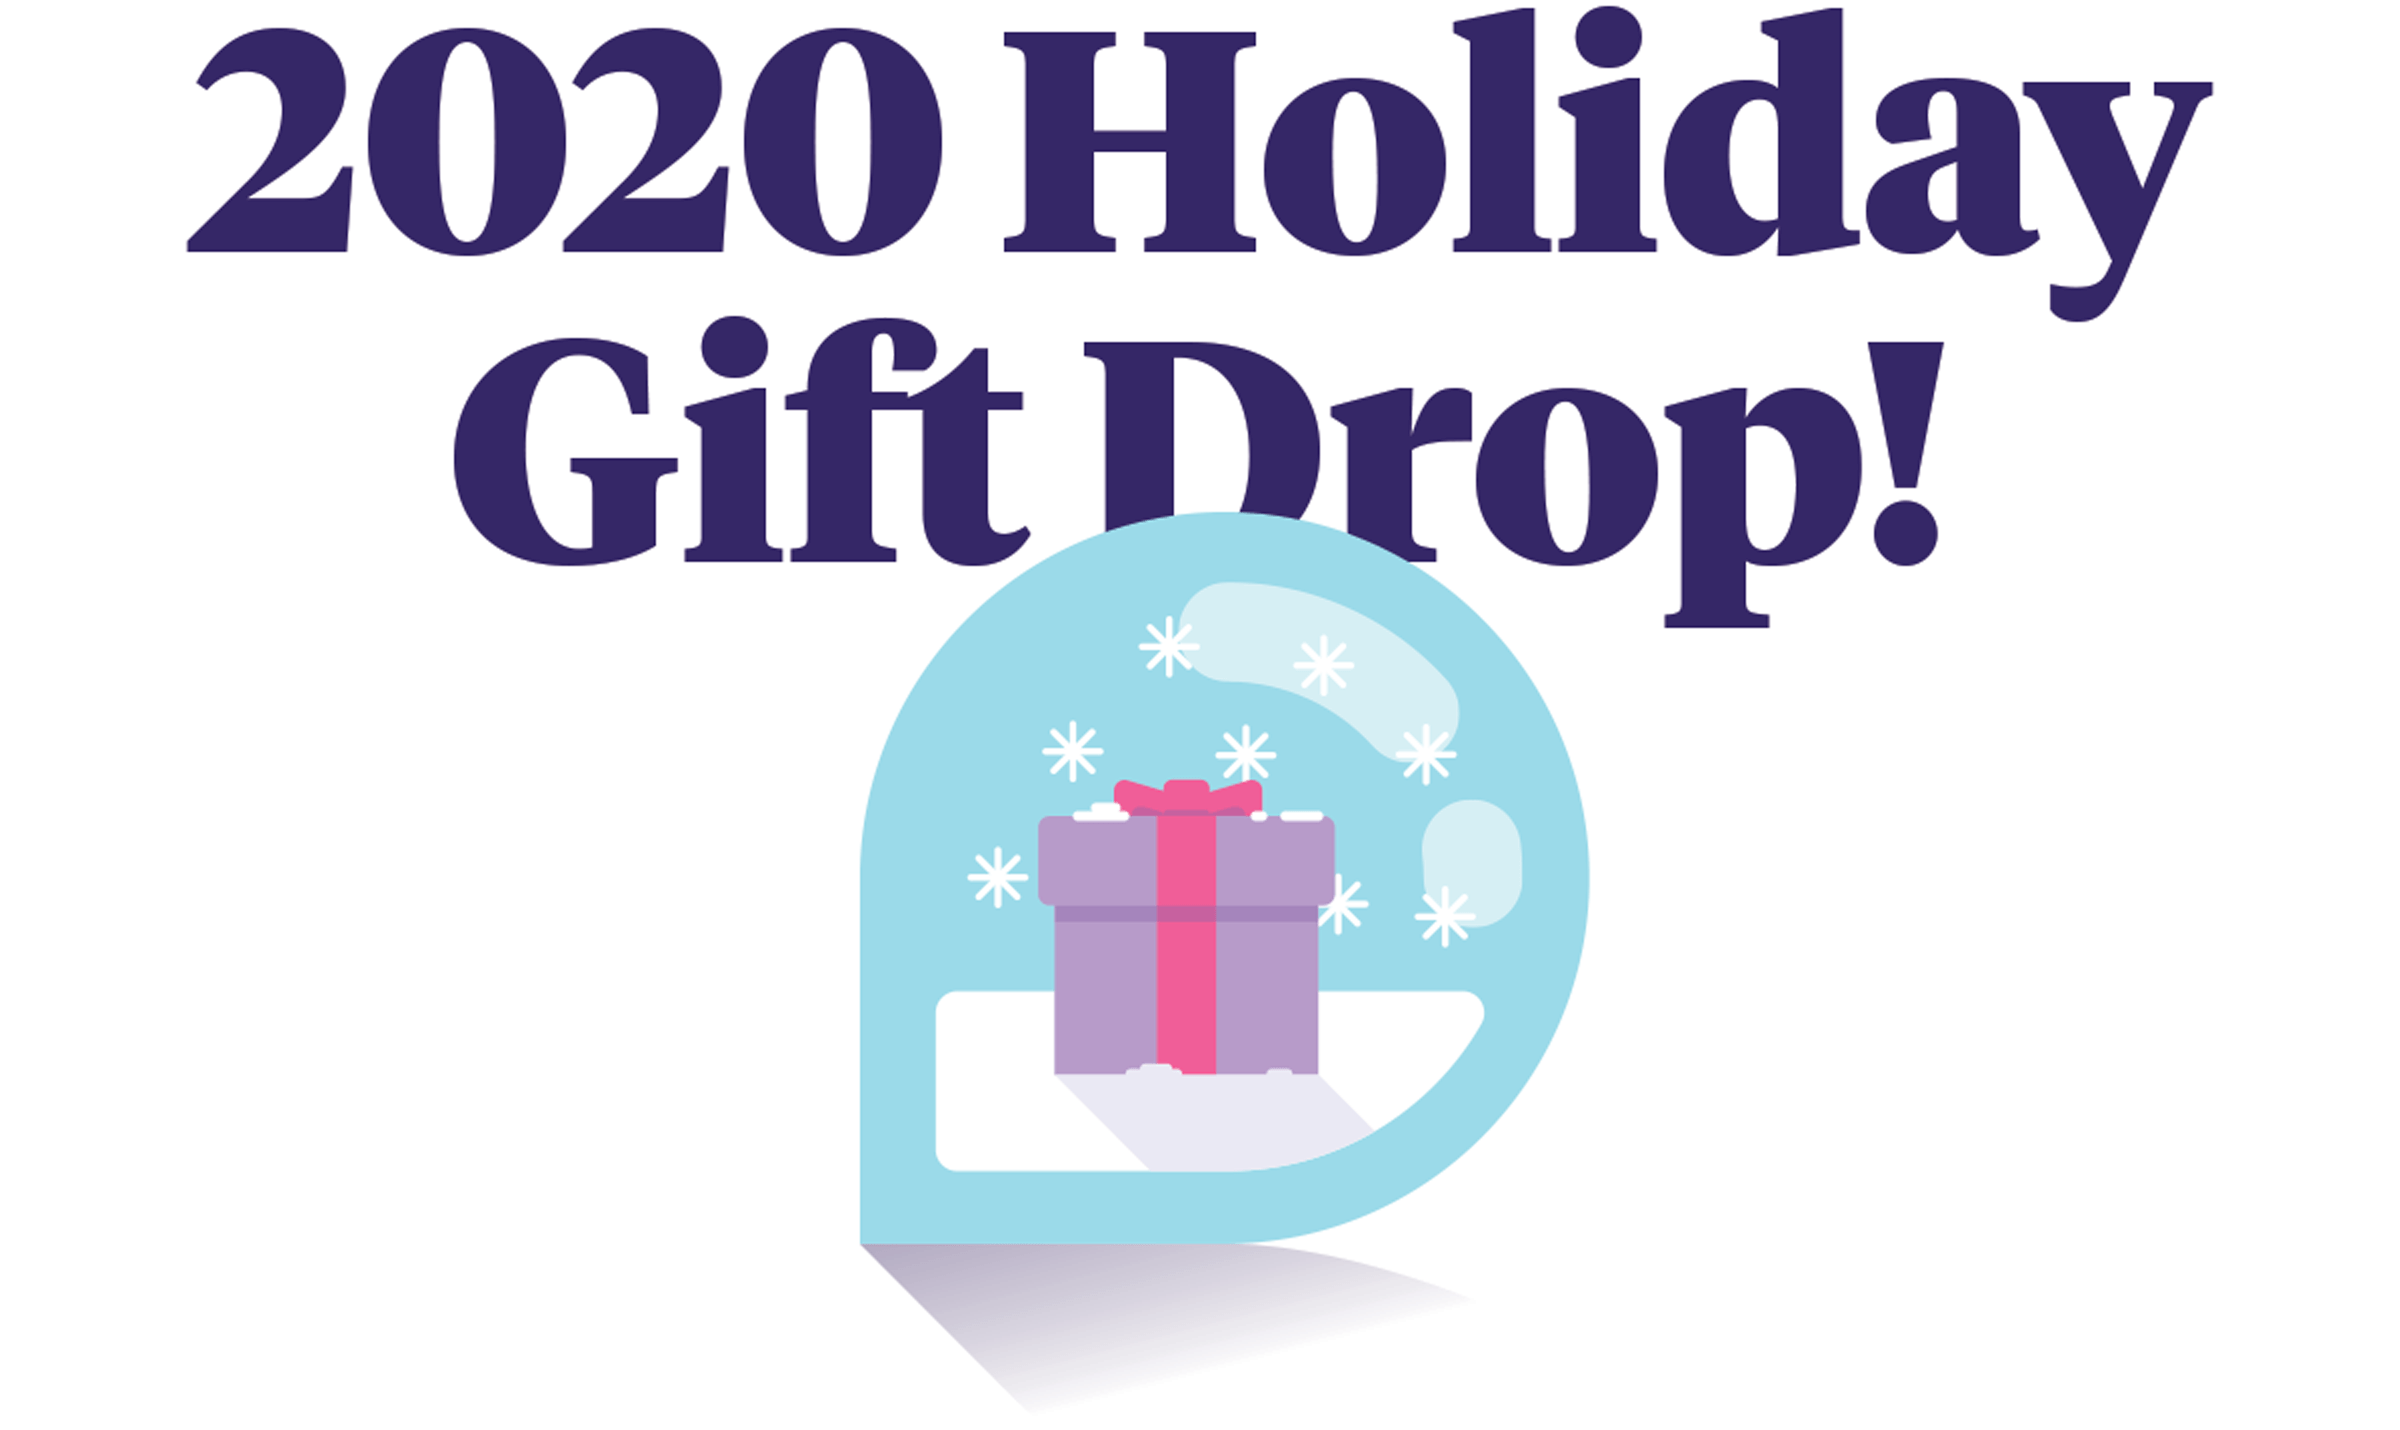 2020 holiday gift drop with snow globe